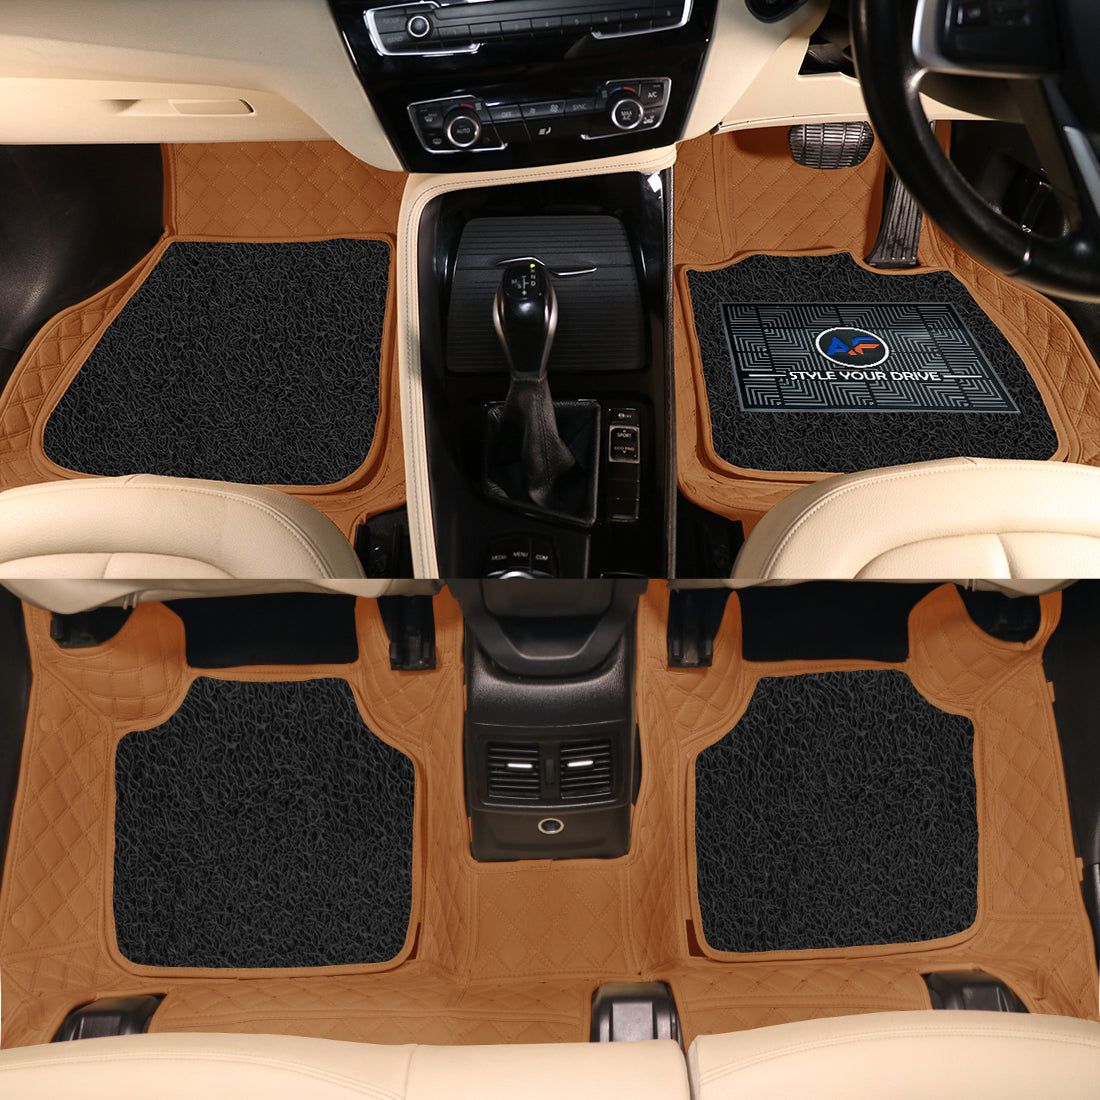 Mercedes G 63 AMG 2021 7D Luxury Car Mat, All Weather Proof, Anti-Skid, 100% Waterproof & Odorless with Unique Diamond Fish Design (24mm Luxury PU Leather, 2 Rows)